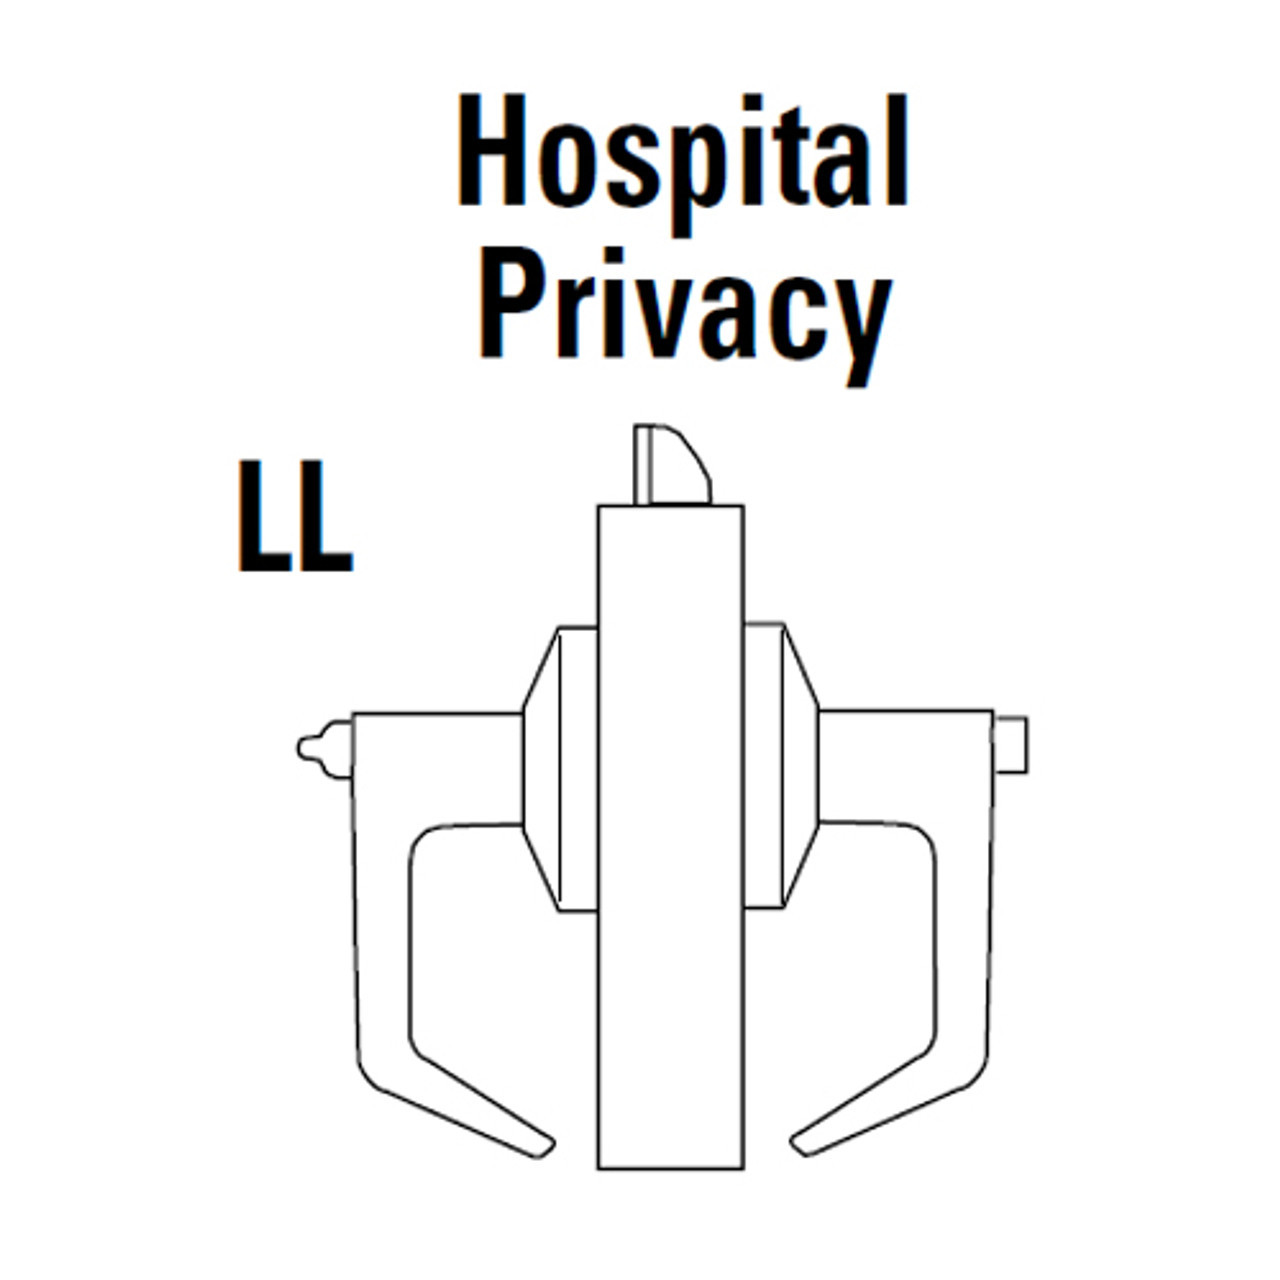 9K30LL14LS3622LM Best 9K Series Hospital Privacy Heavy Duty Cylindrical Lever Locks in Black